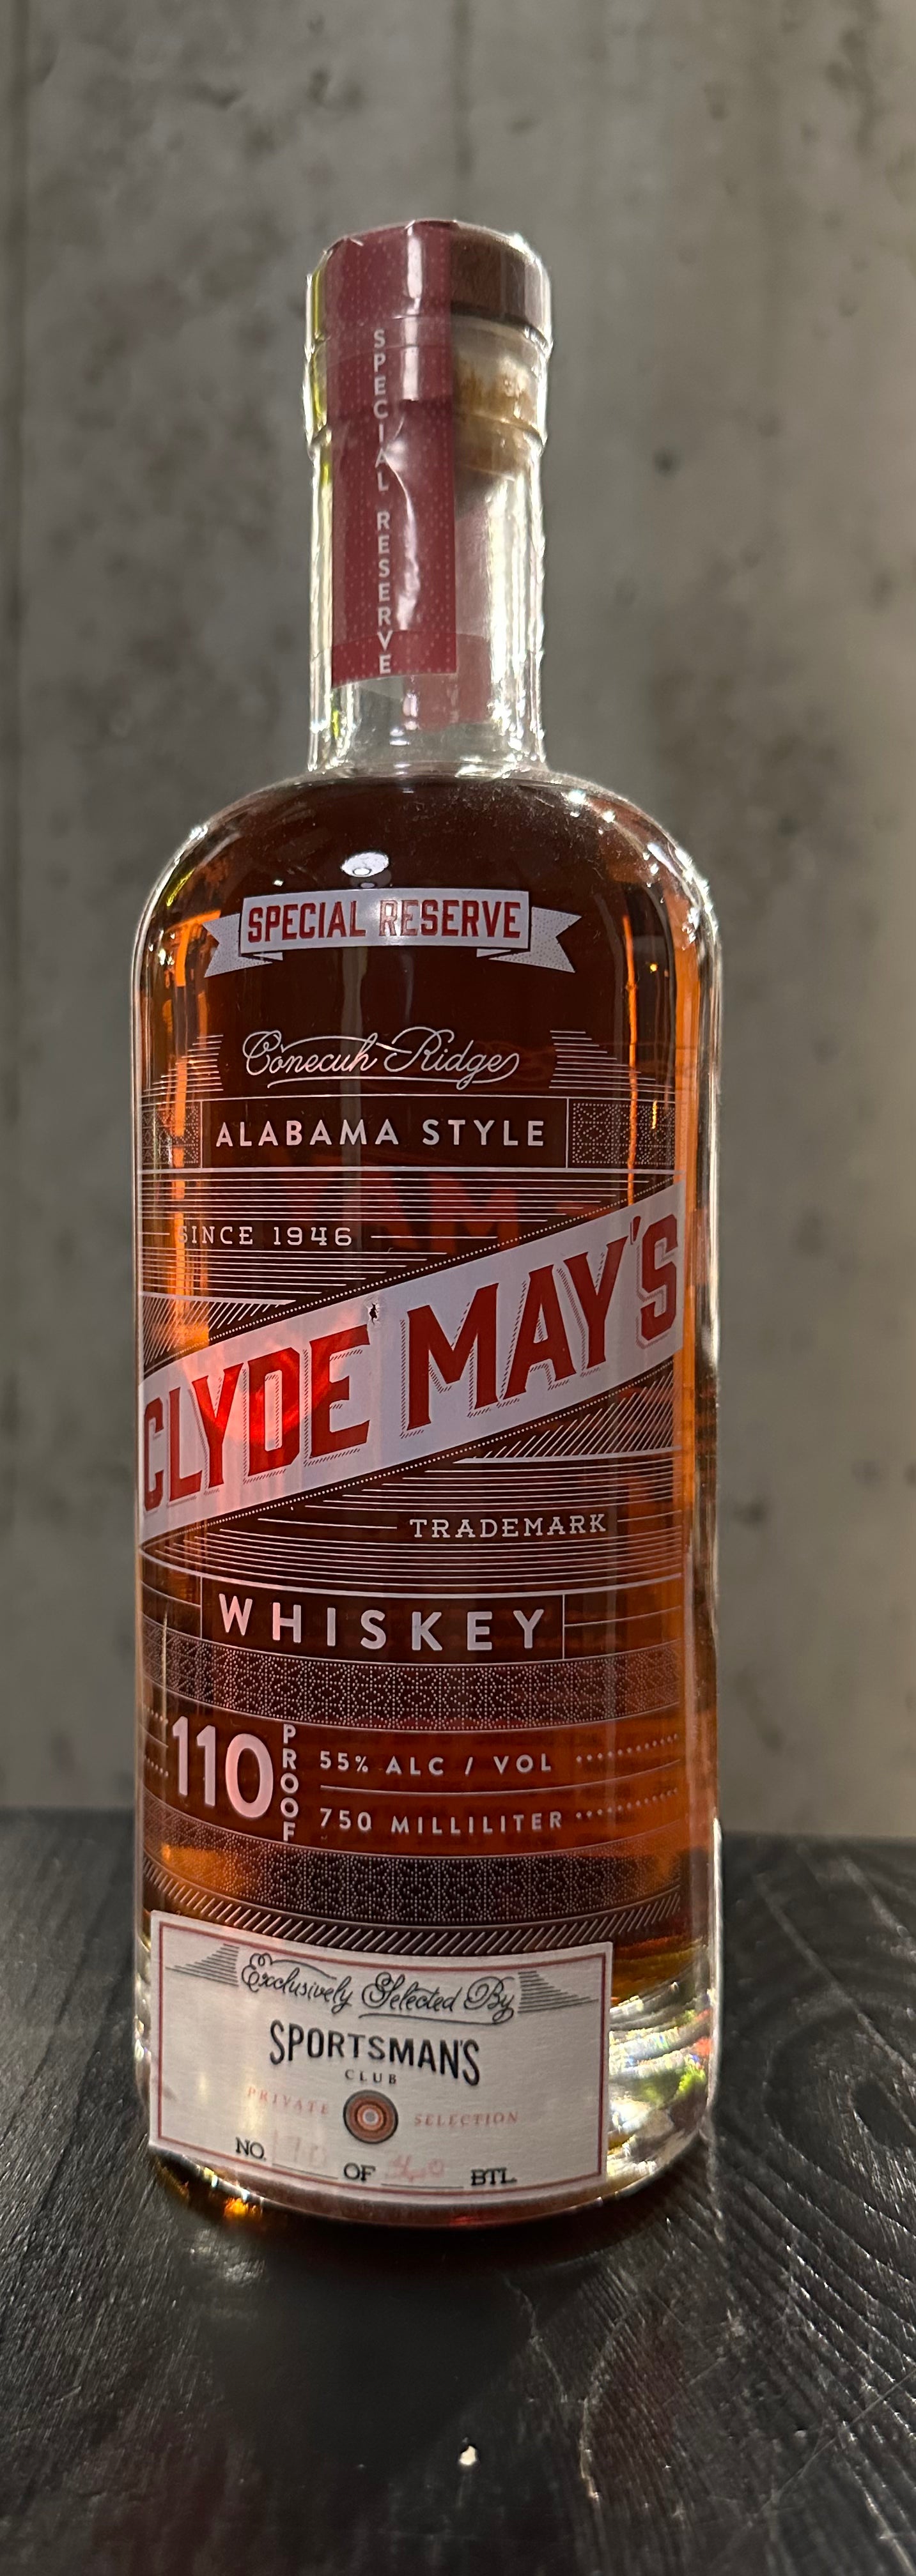 Clyde May's "Special Reserva" Alabama Style Whiskey